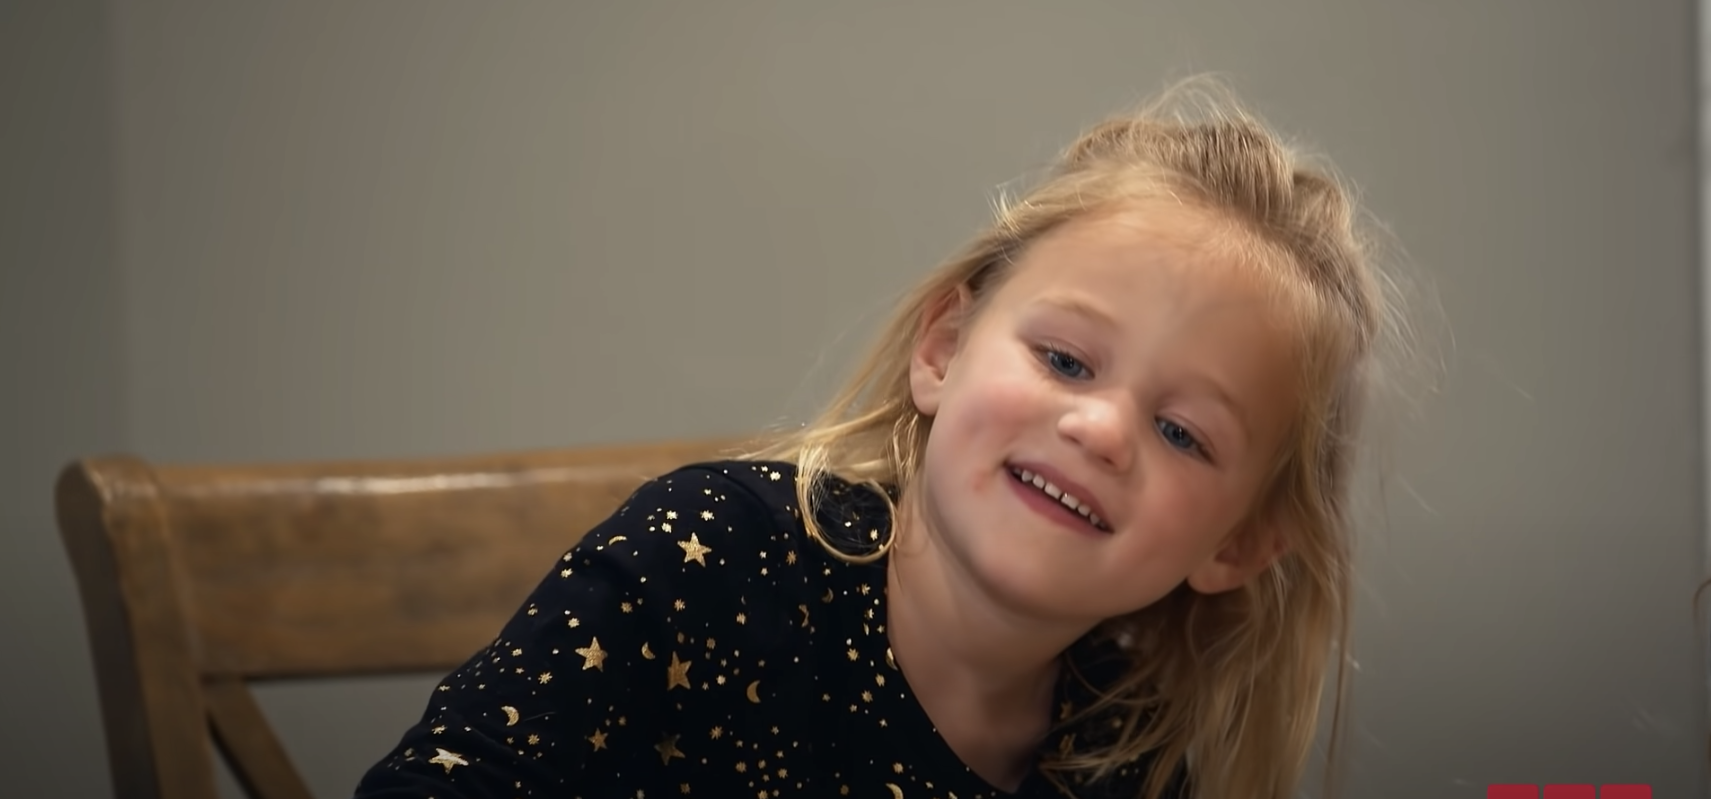 OutDaughtered allowance